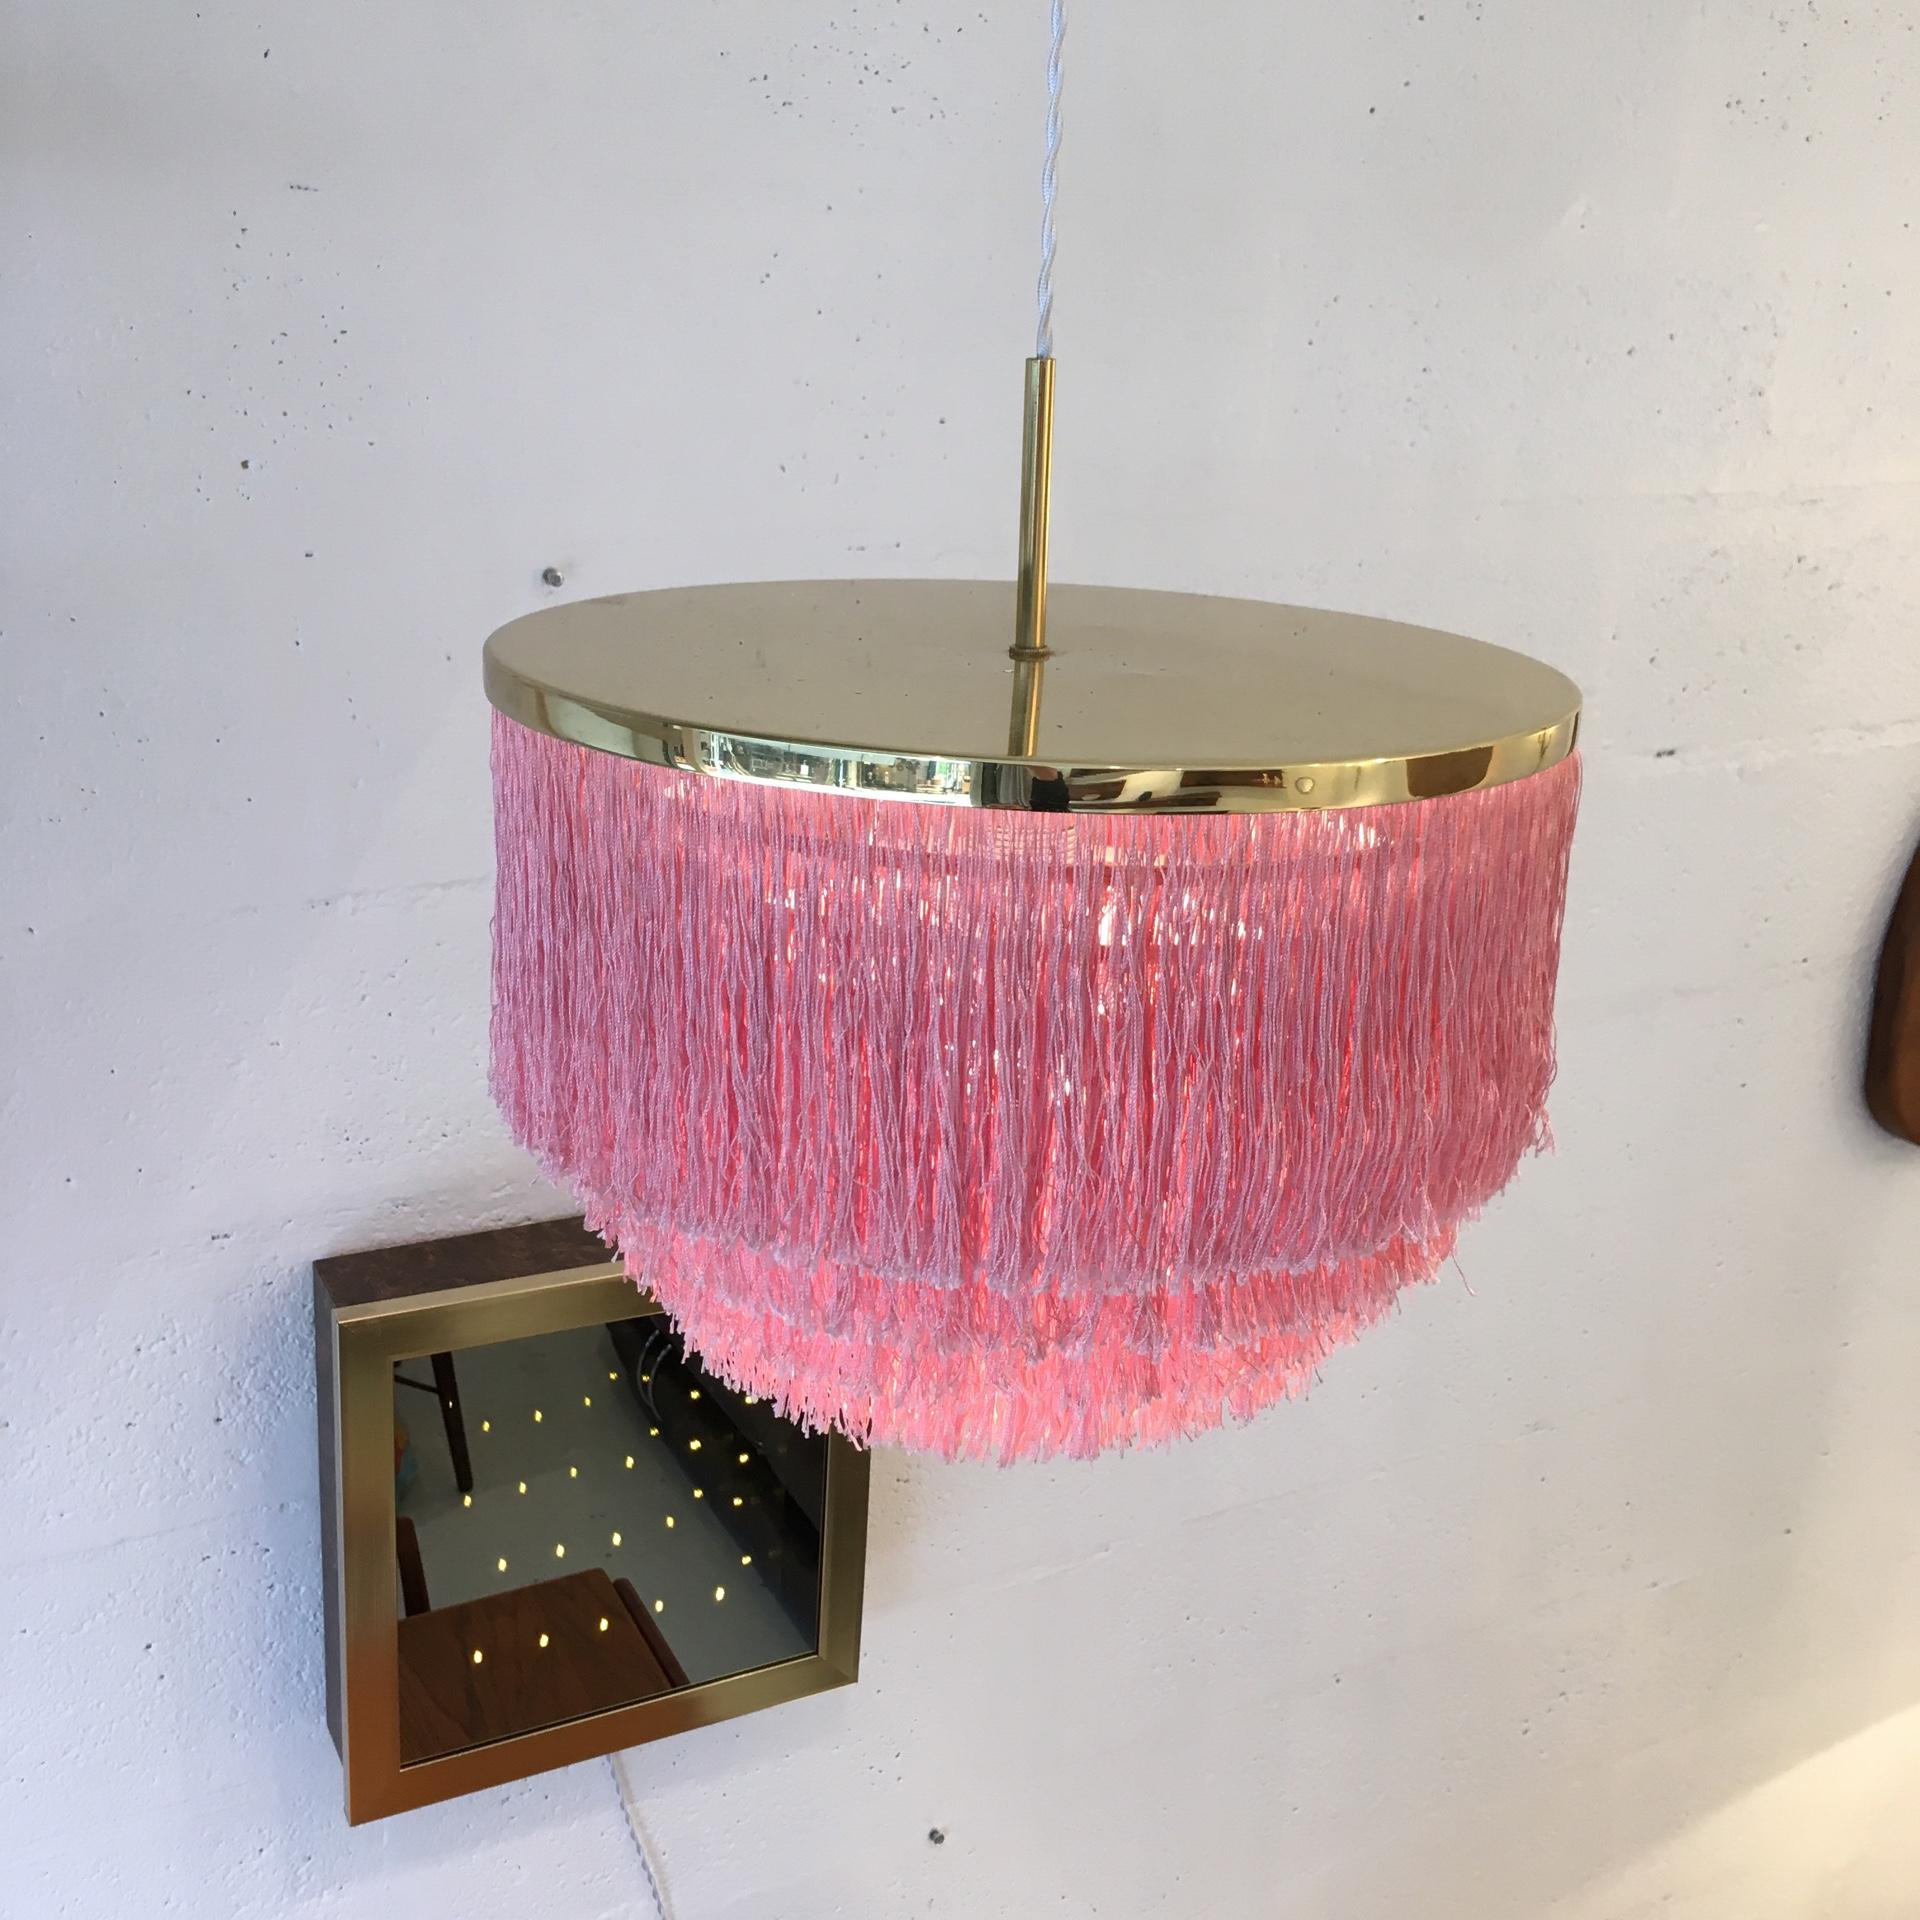 A Hans-Agne Jakobsson for Markaryd pink silk fringed pendant with brass frame, model T-603, dating from the 1960s and manufactured in Sweden.